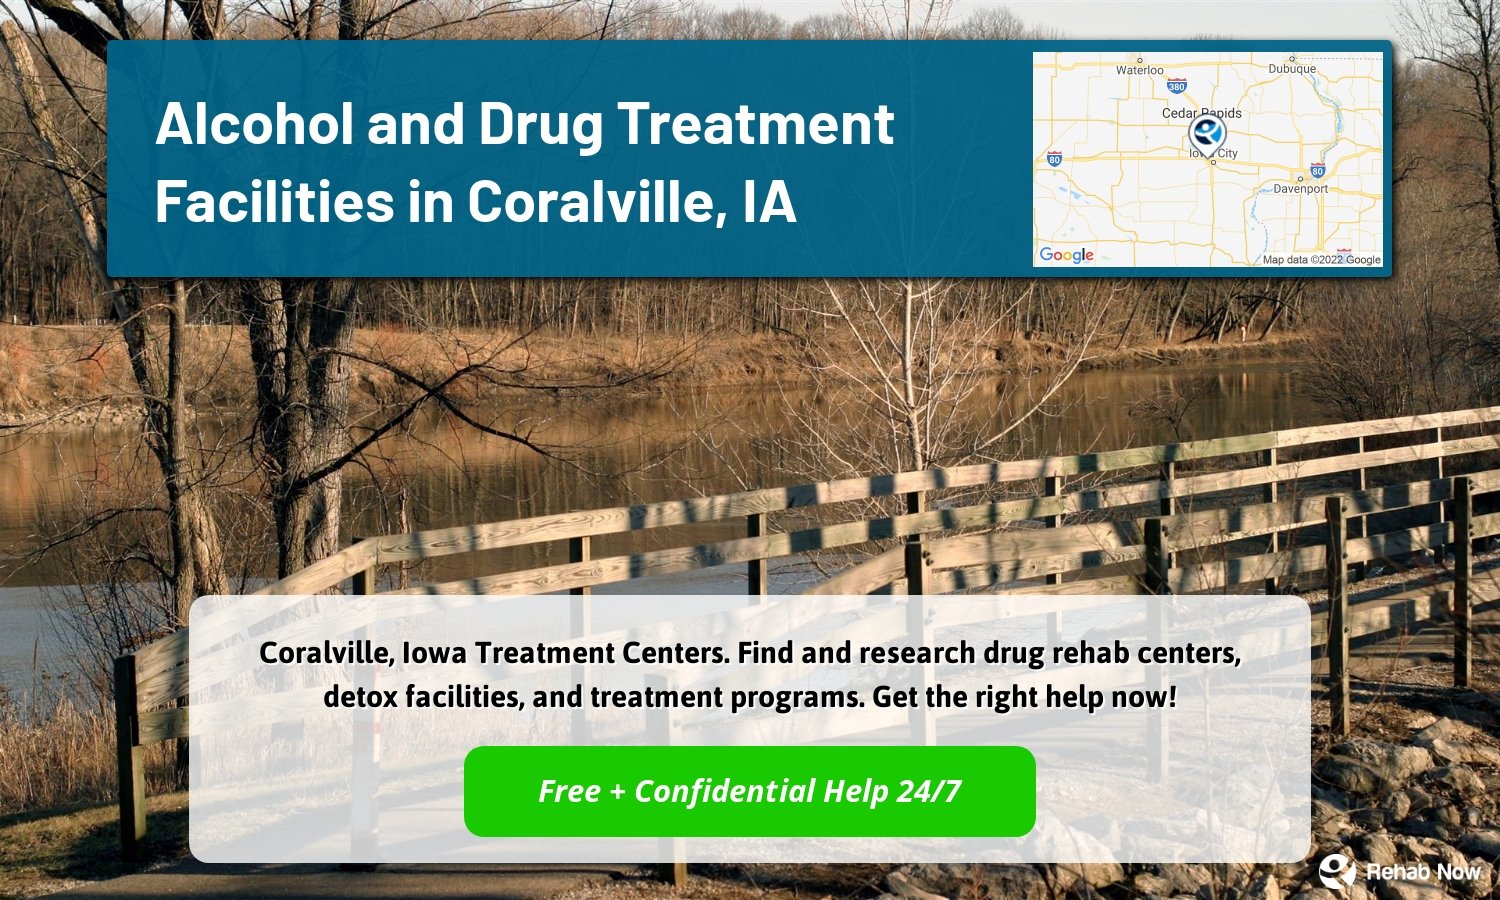 Coralville, Iowa Treatment Centers. Find and research drug rehab centers, detox facilities, and treatment programs. Get the right help now!